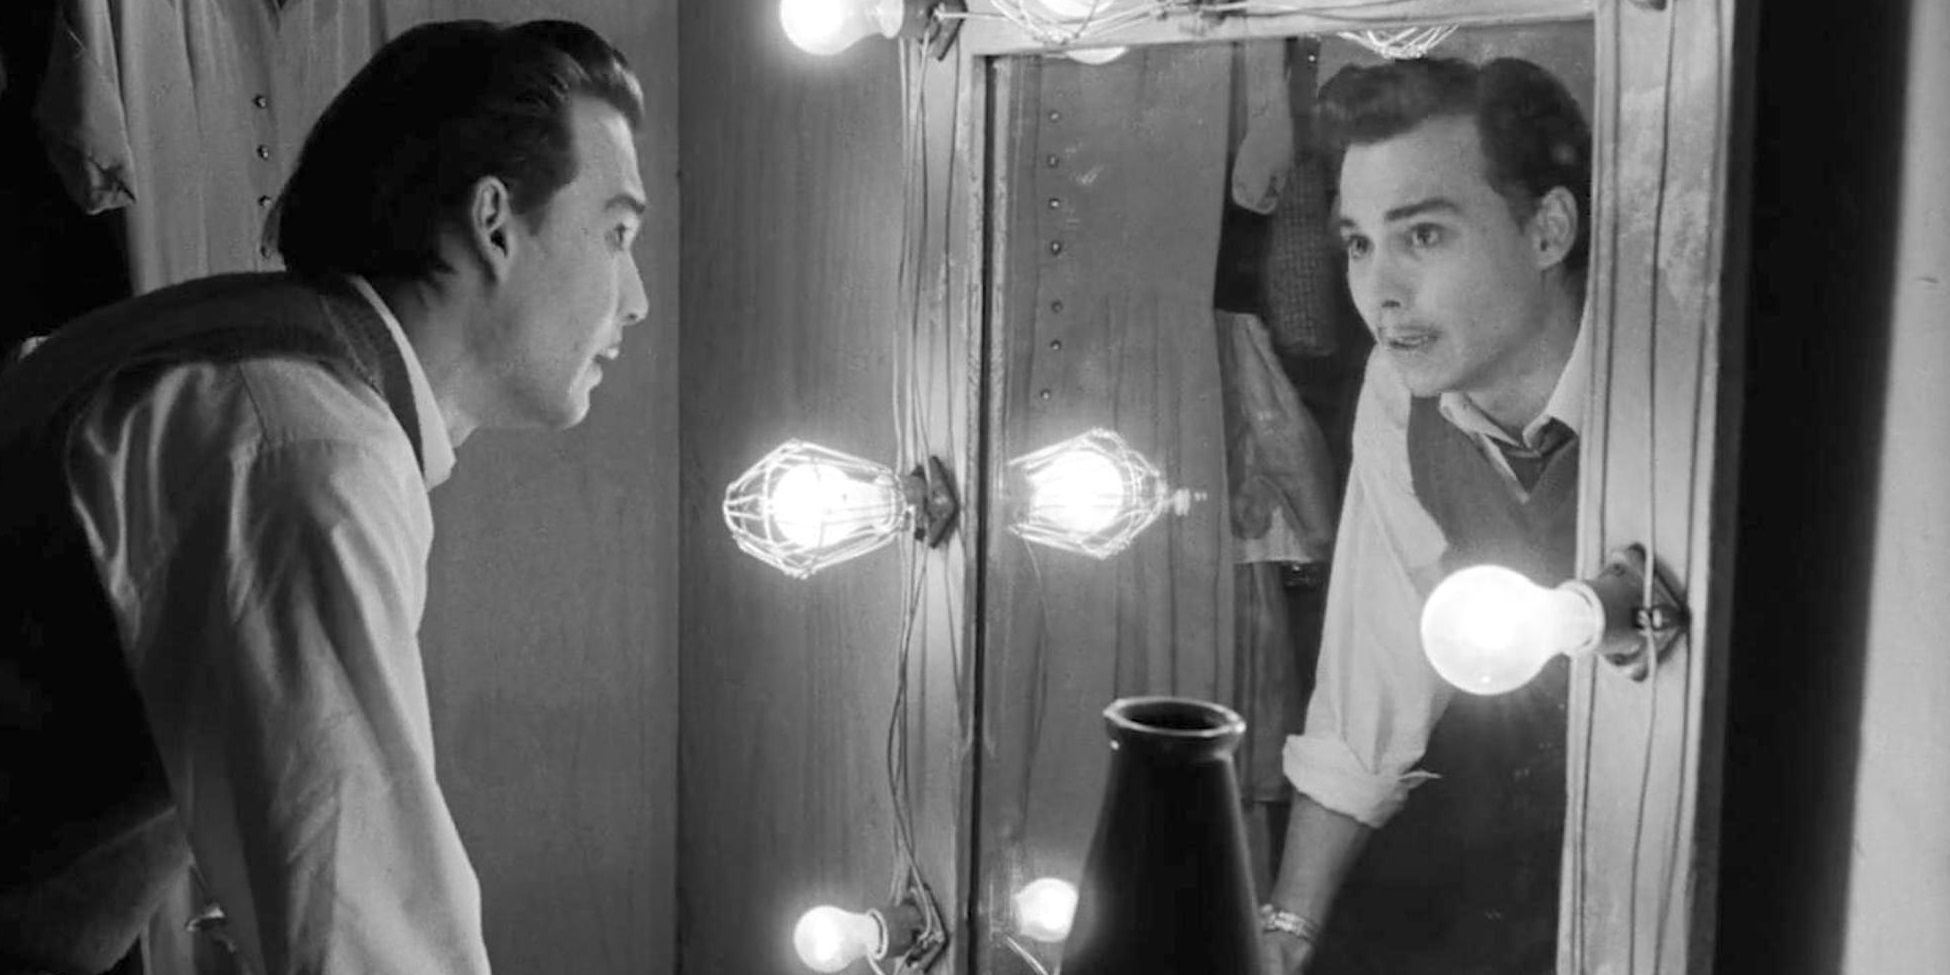 Johnny Depp as Ed Wood in a dressing room